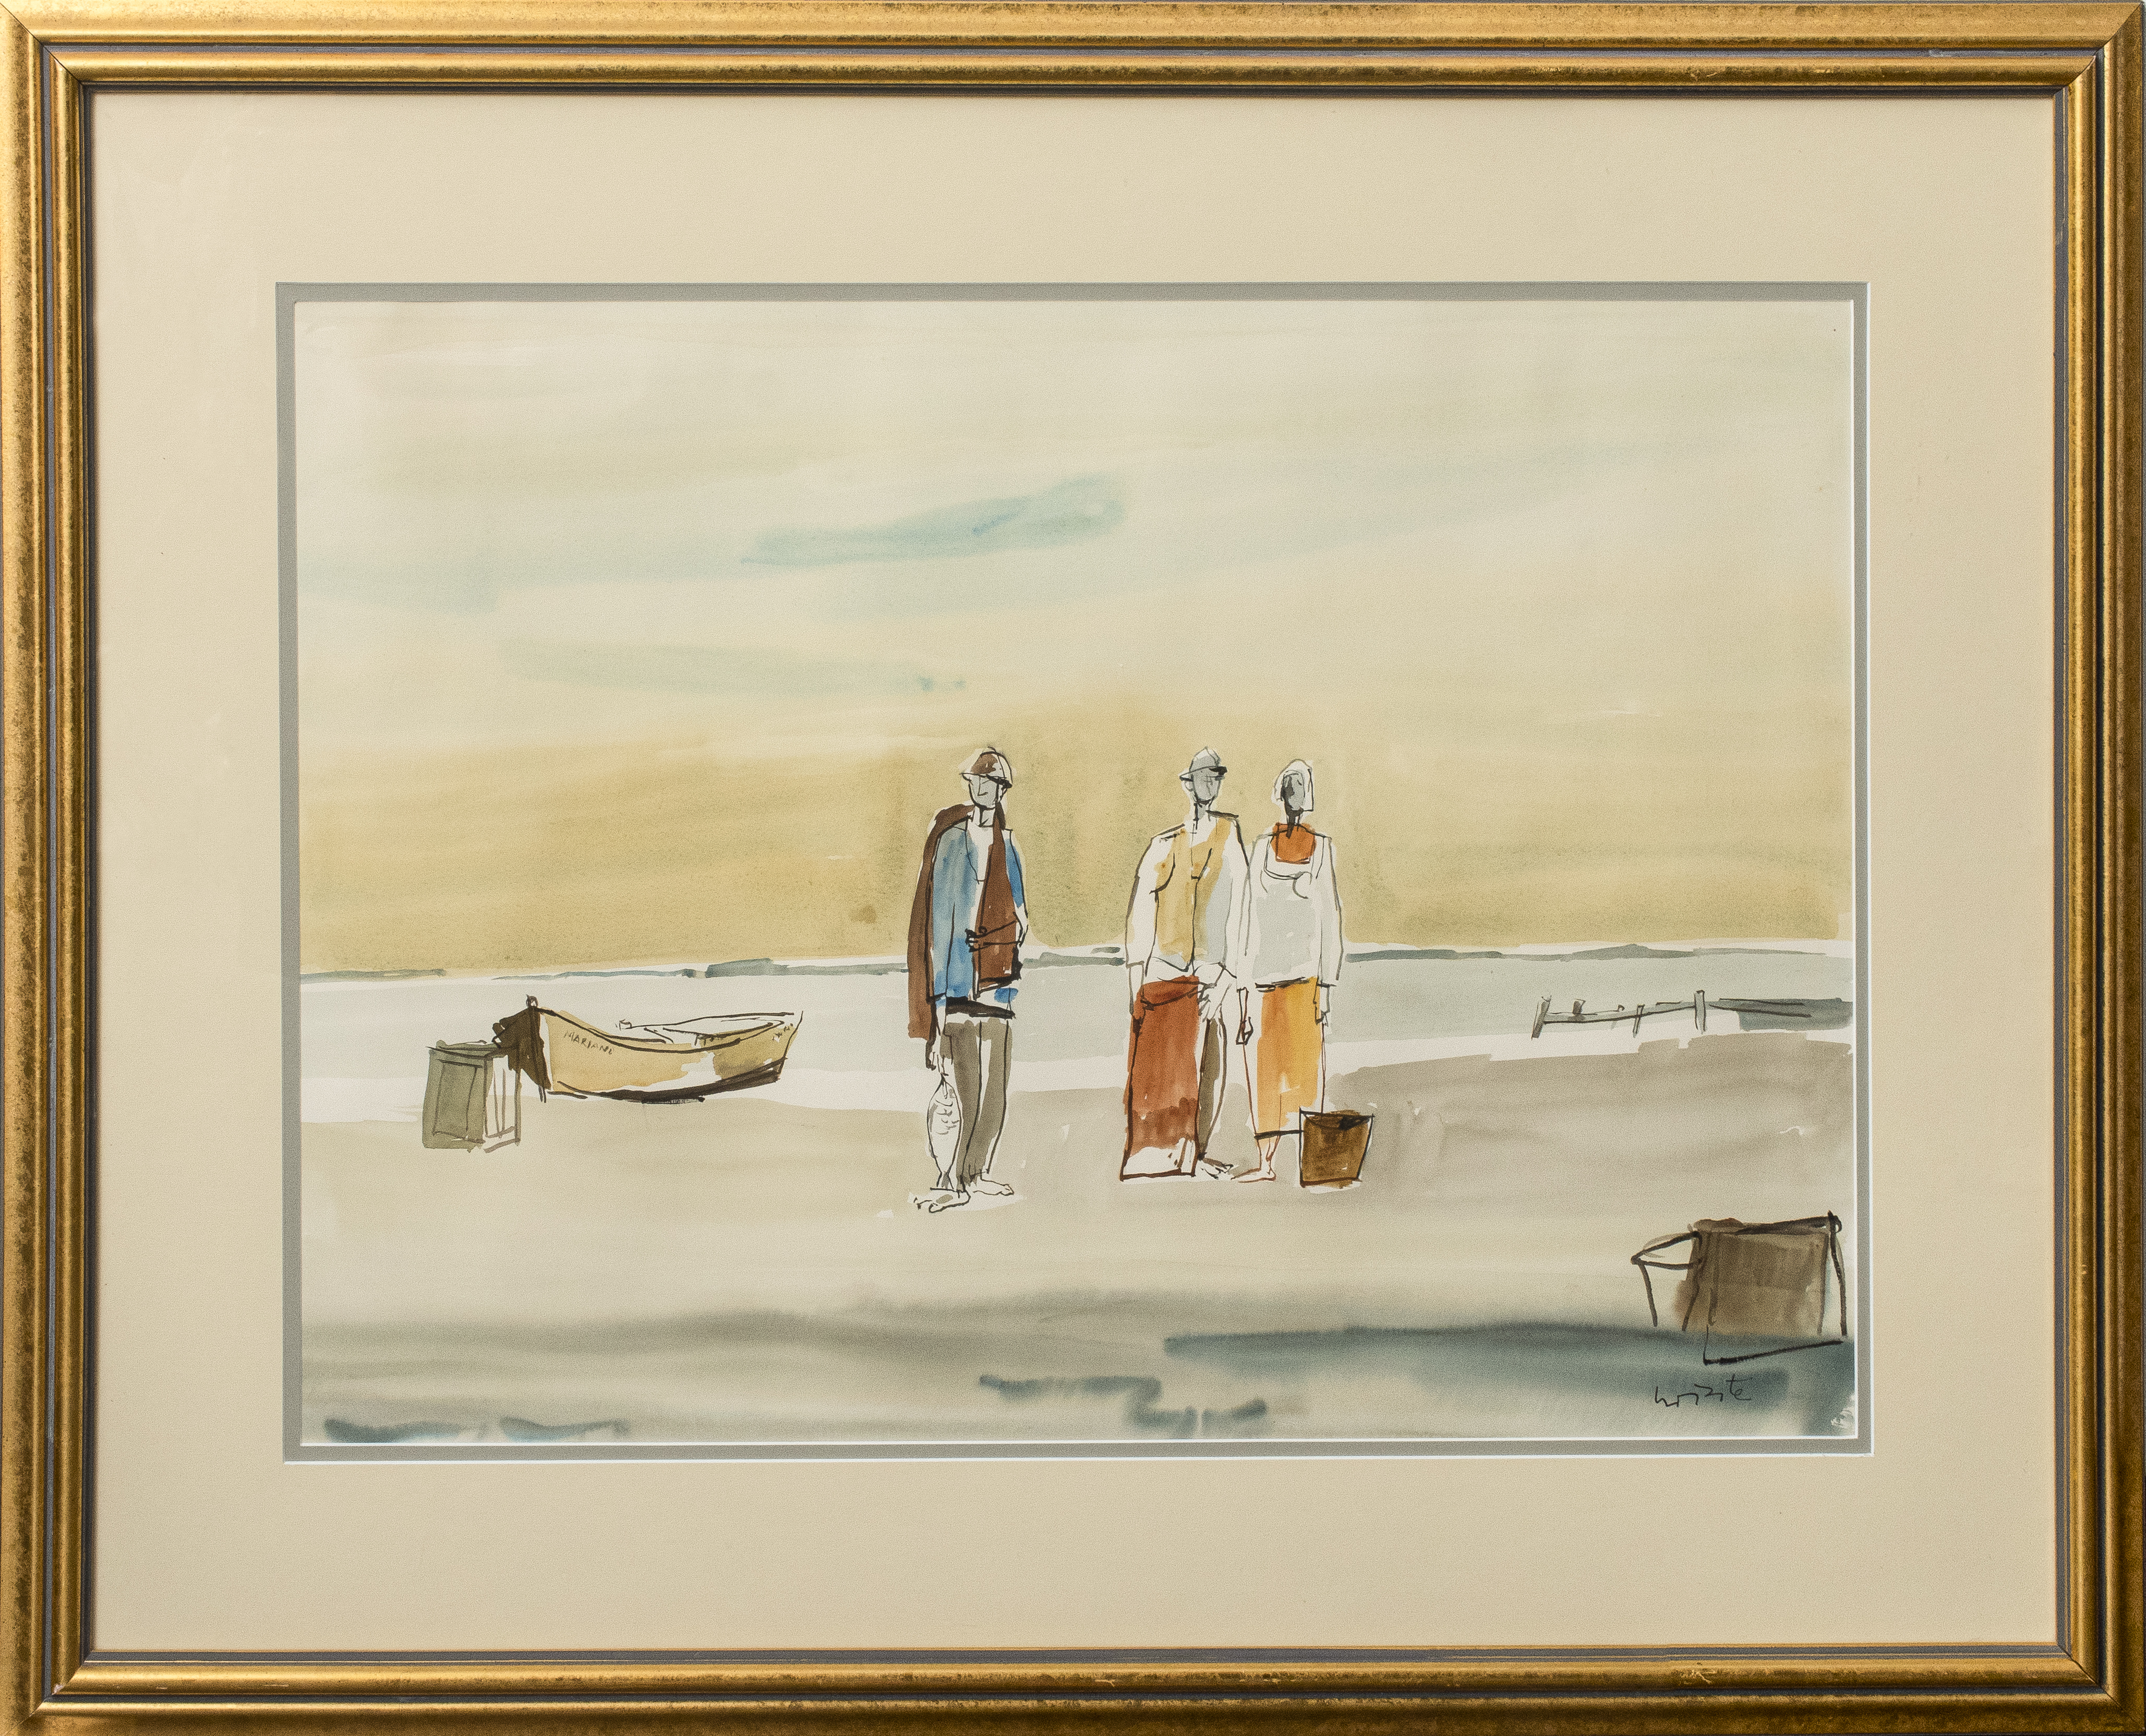 ILLEGIBLY SIGNED "FIGURES AT SHORE"